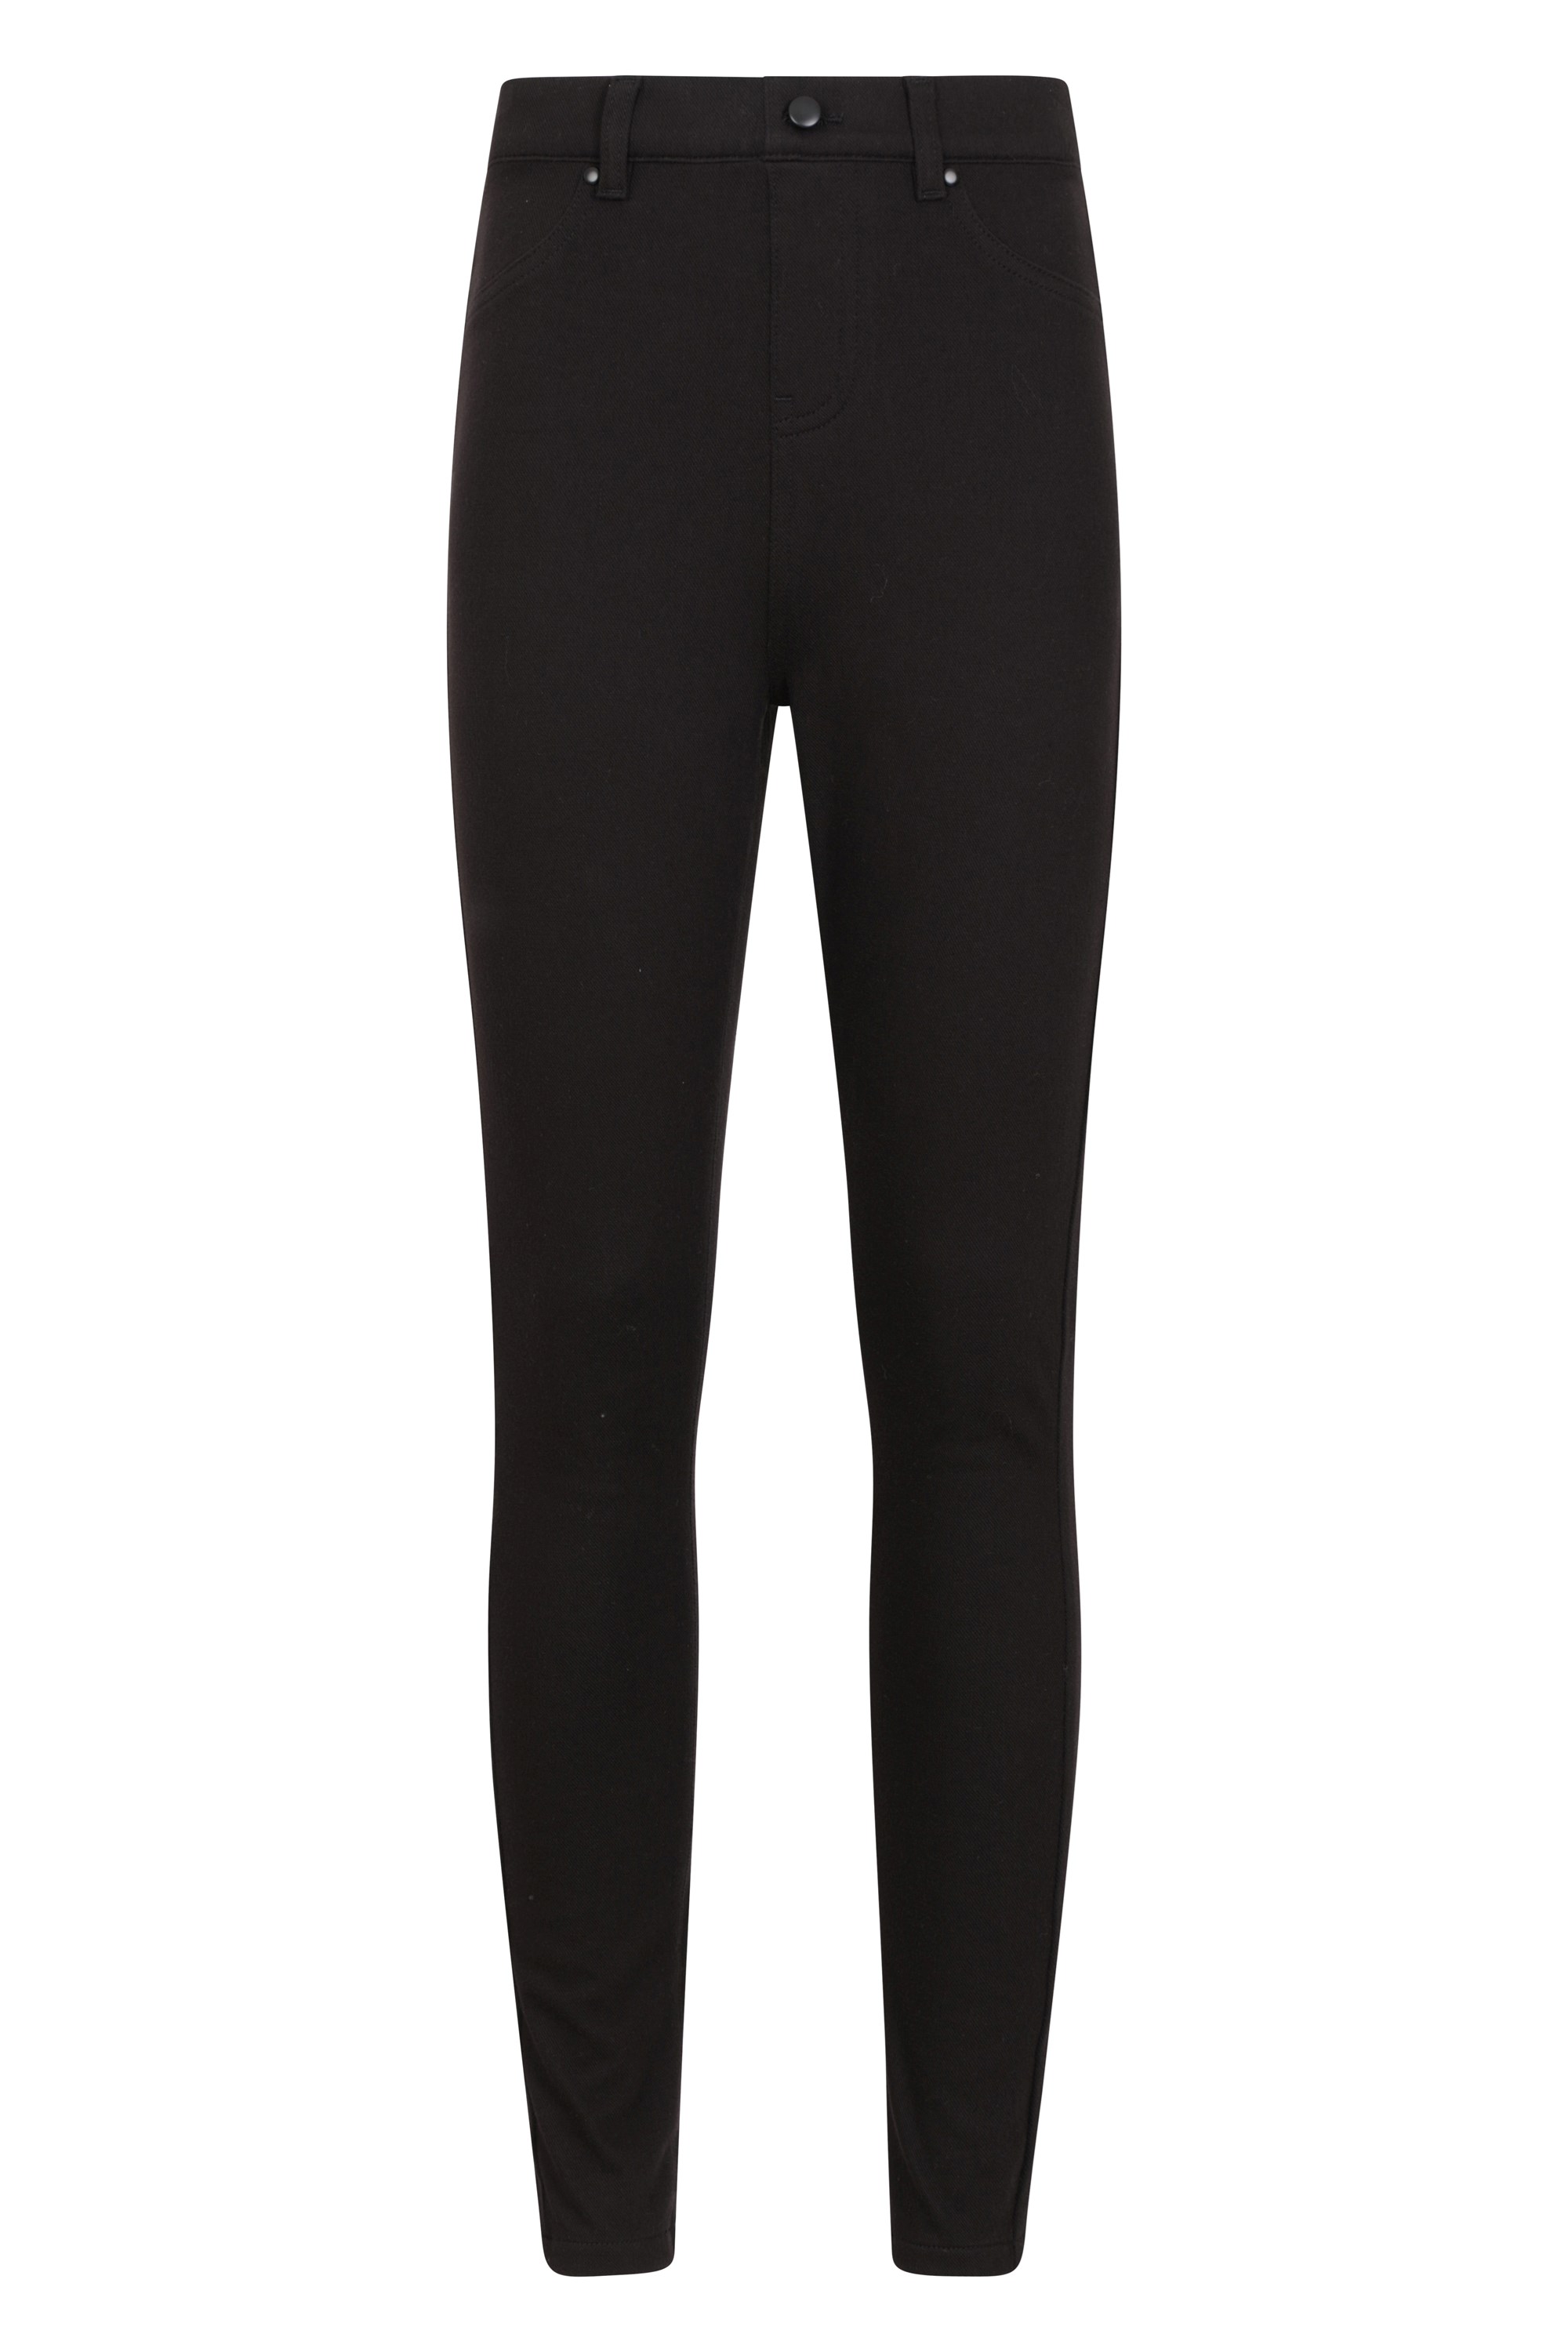 Mountain Warehouse Mountain Warehouse Womens Leggings Ladies Outdoor Warm Trousers with Pockets 